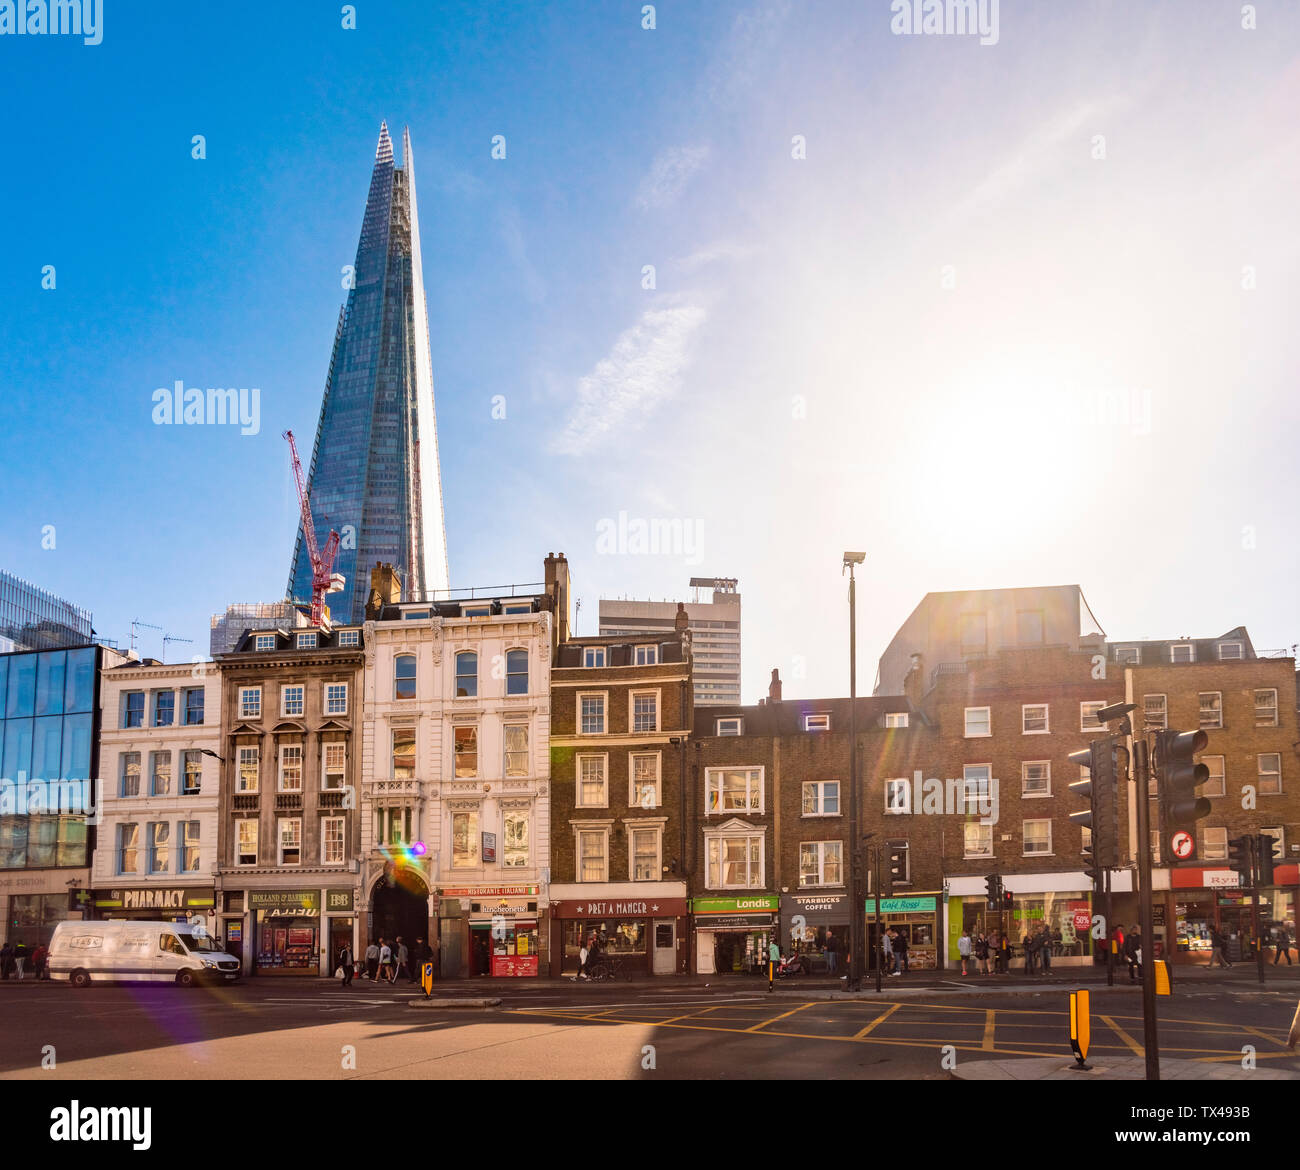 UK, London, Borough High Street with the Shard in background Stock Photo